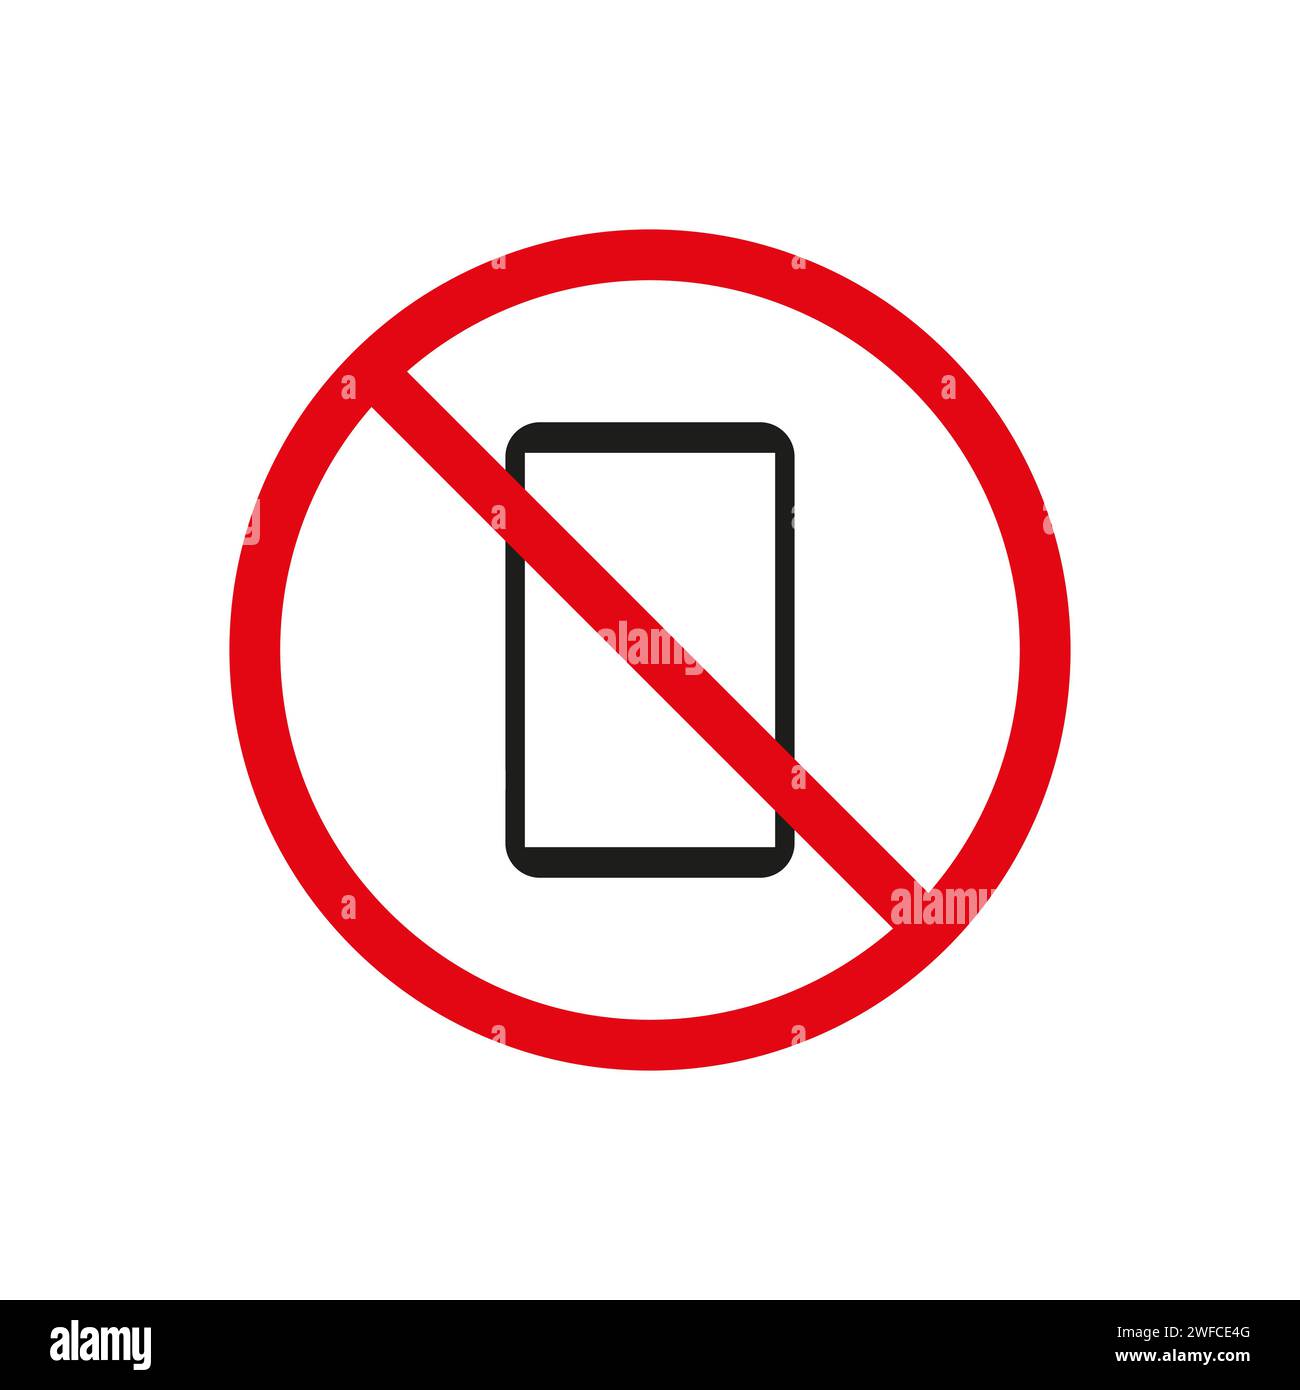 No phone sign. Gadget icon. Red circle. Flat art. Forbidden concept. Public information. Vector illustration. Stock image. EPS 10. Stock Vector